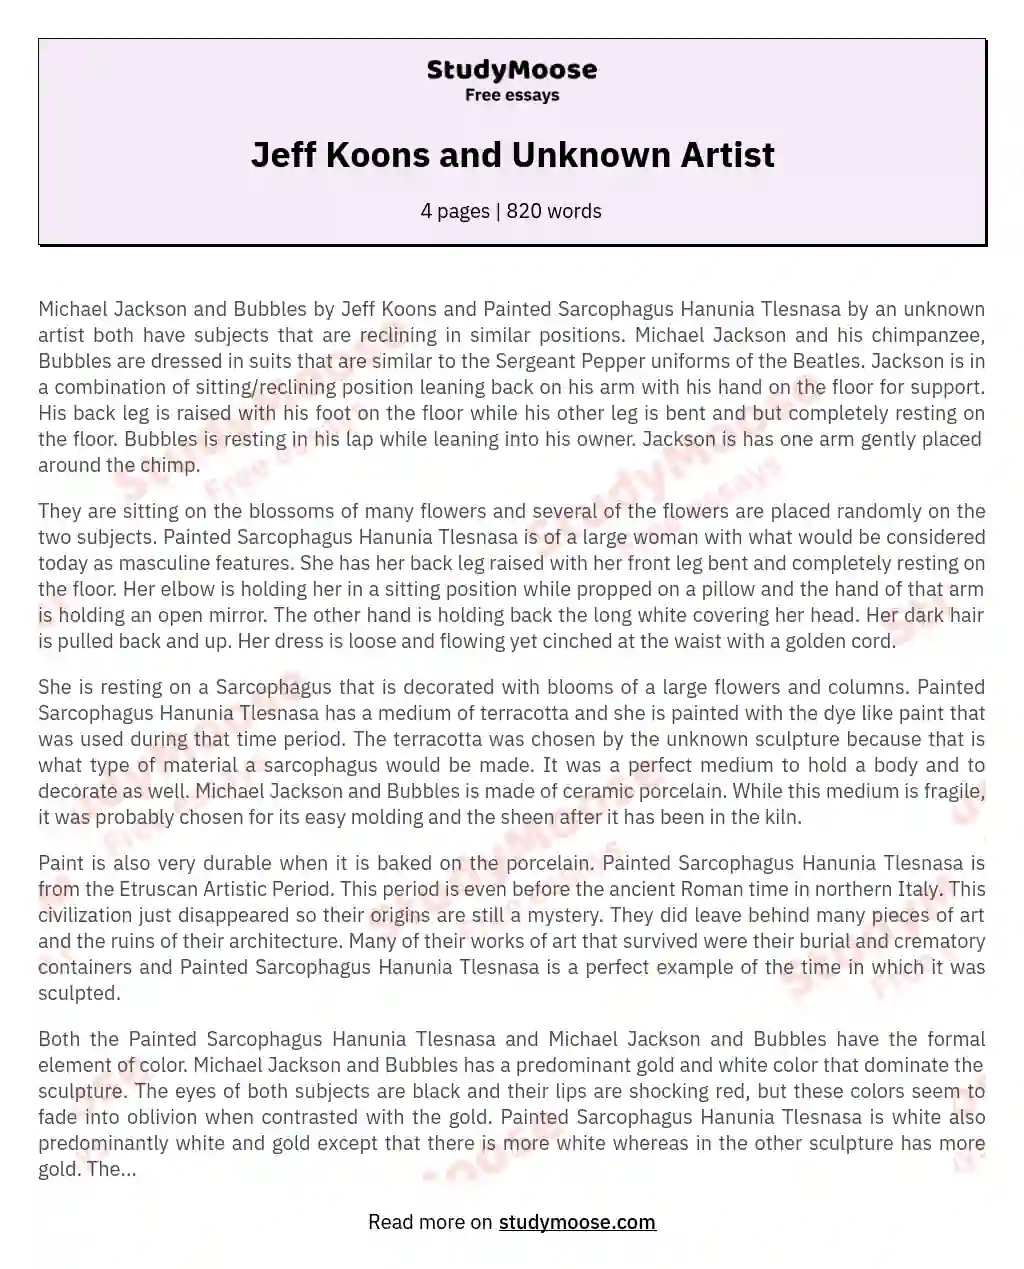 Jeff Koons and Unknown Artist essay